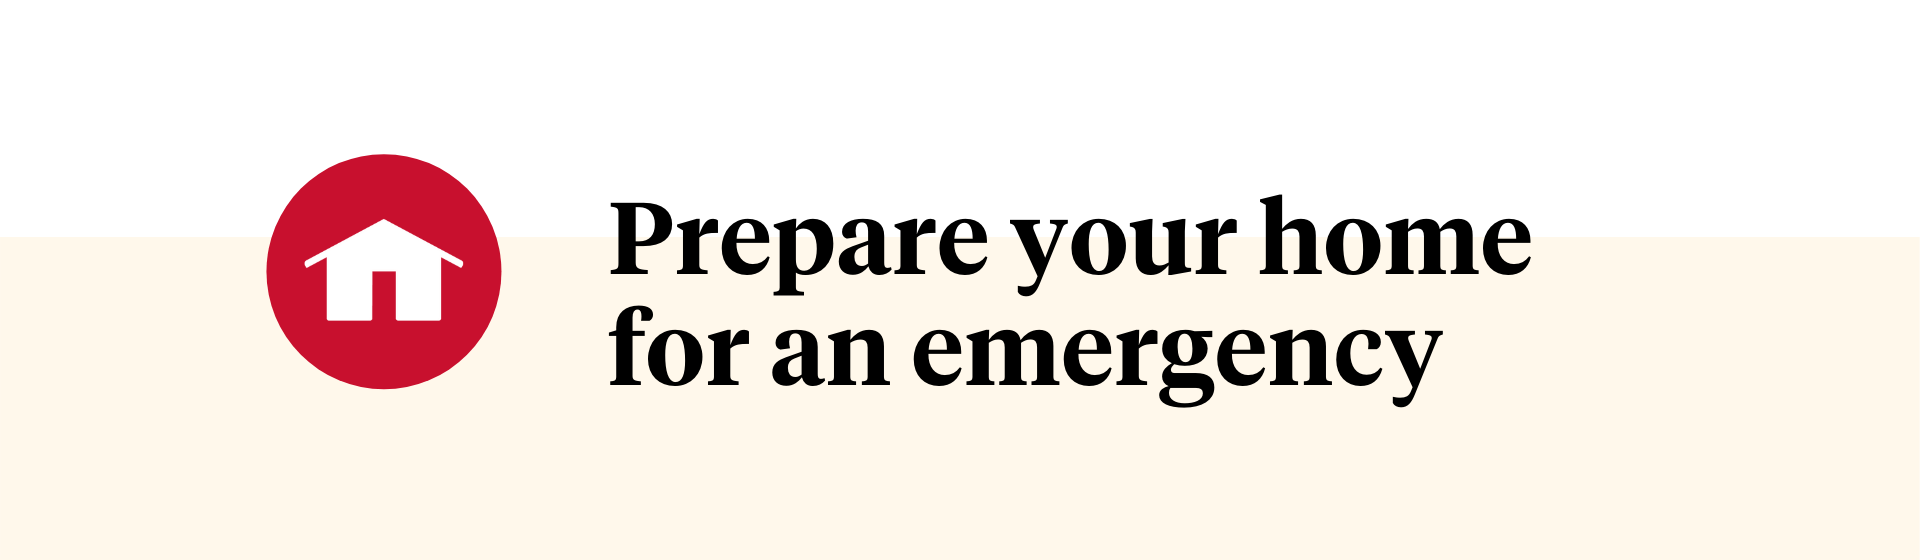 Prepare your home for an emergency graphic.